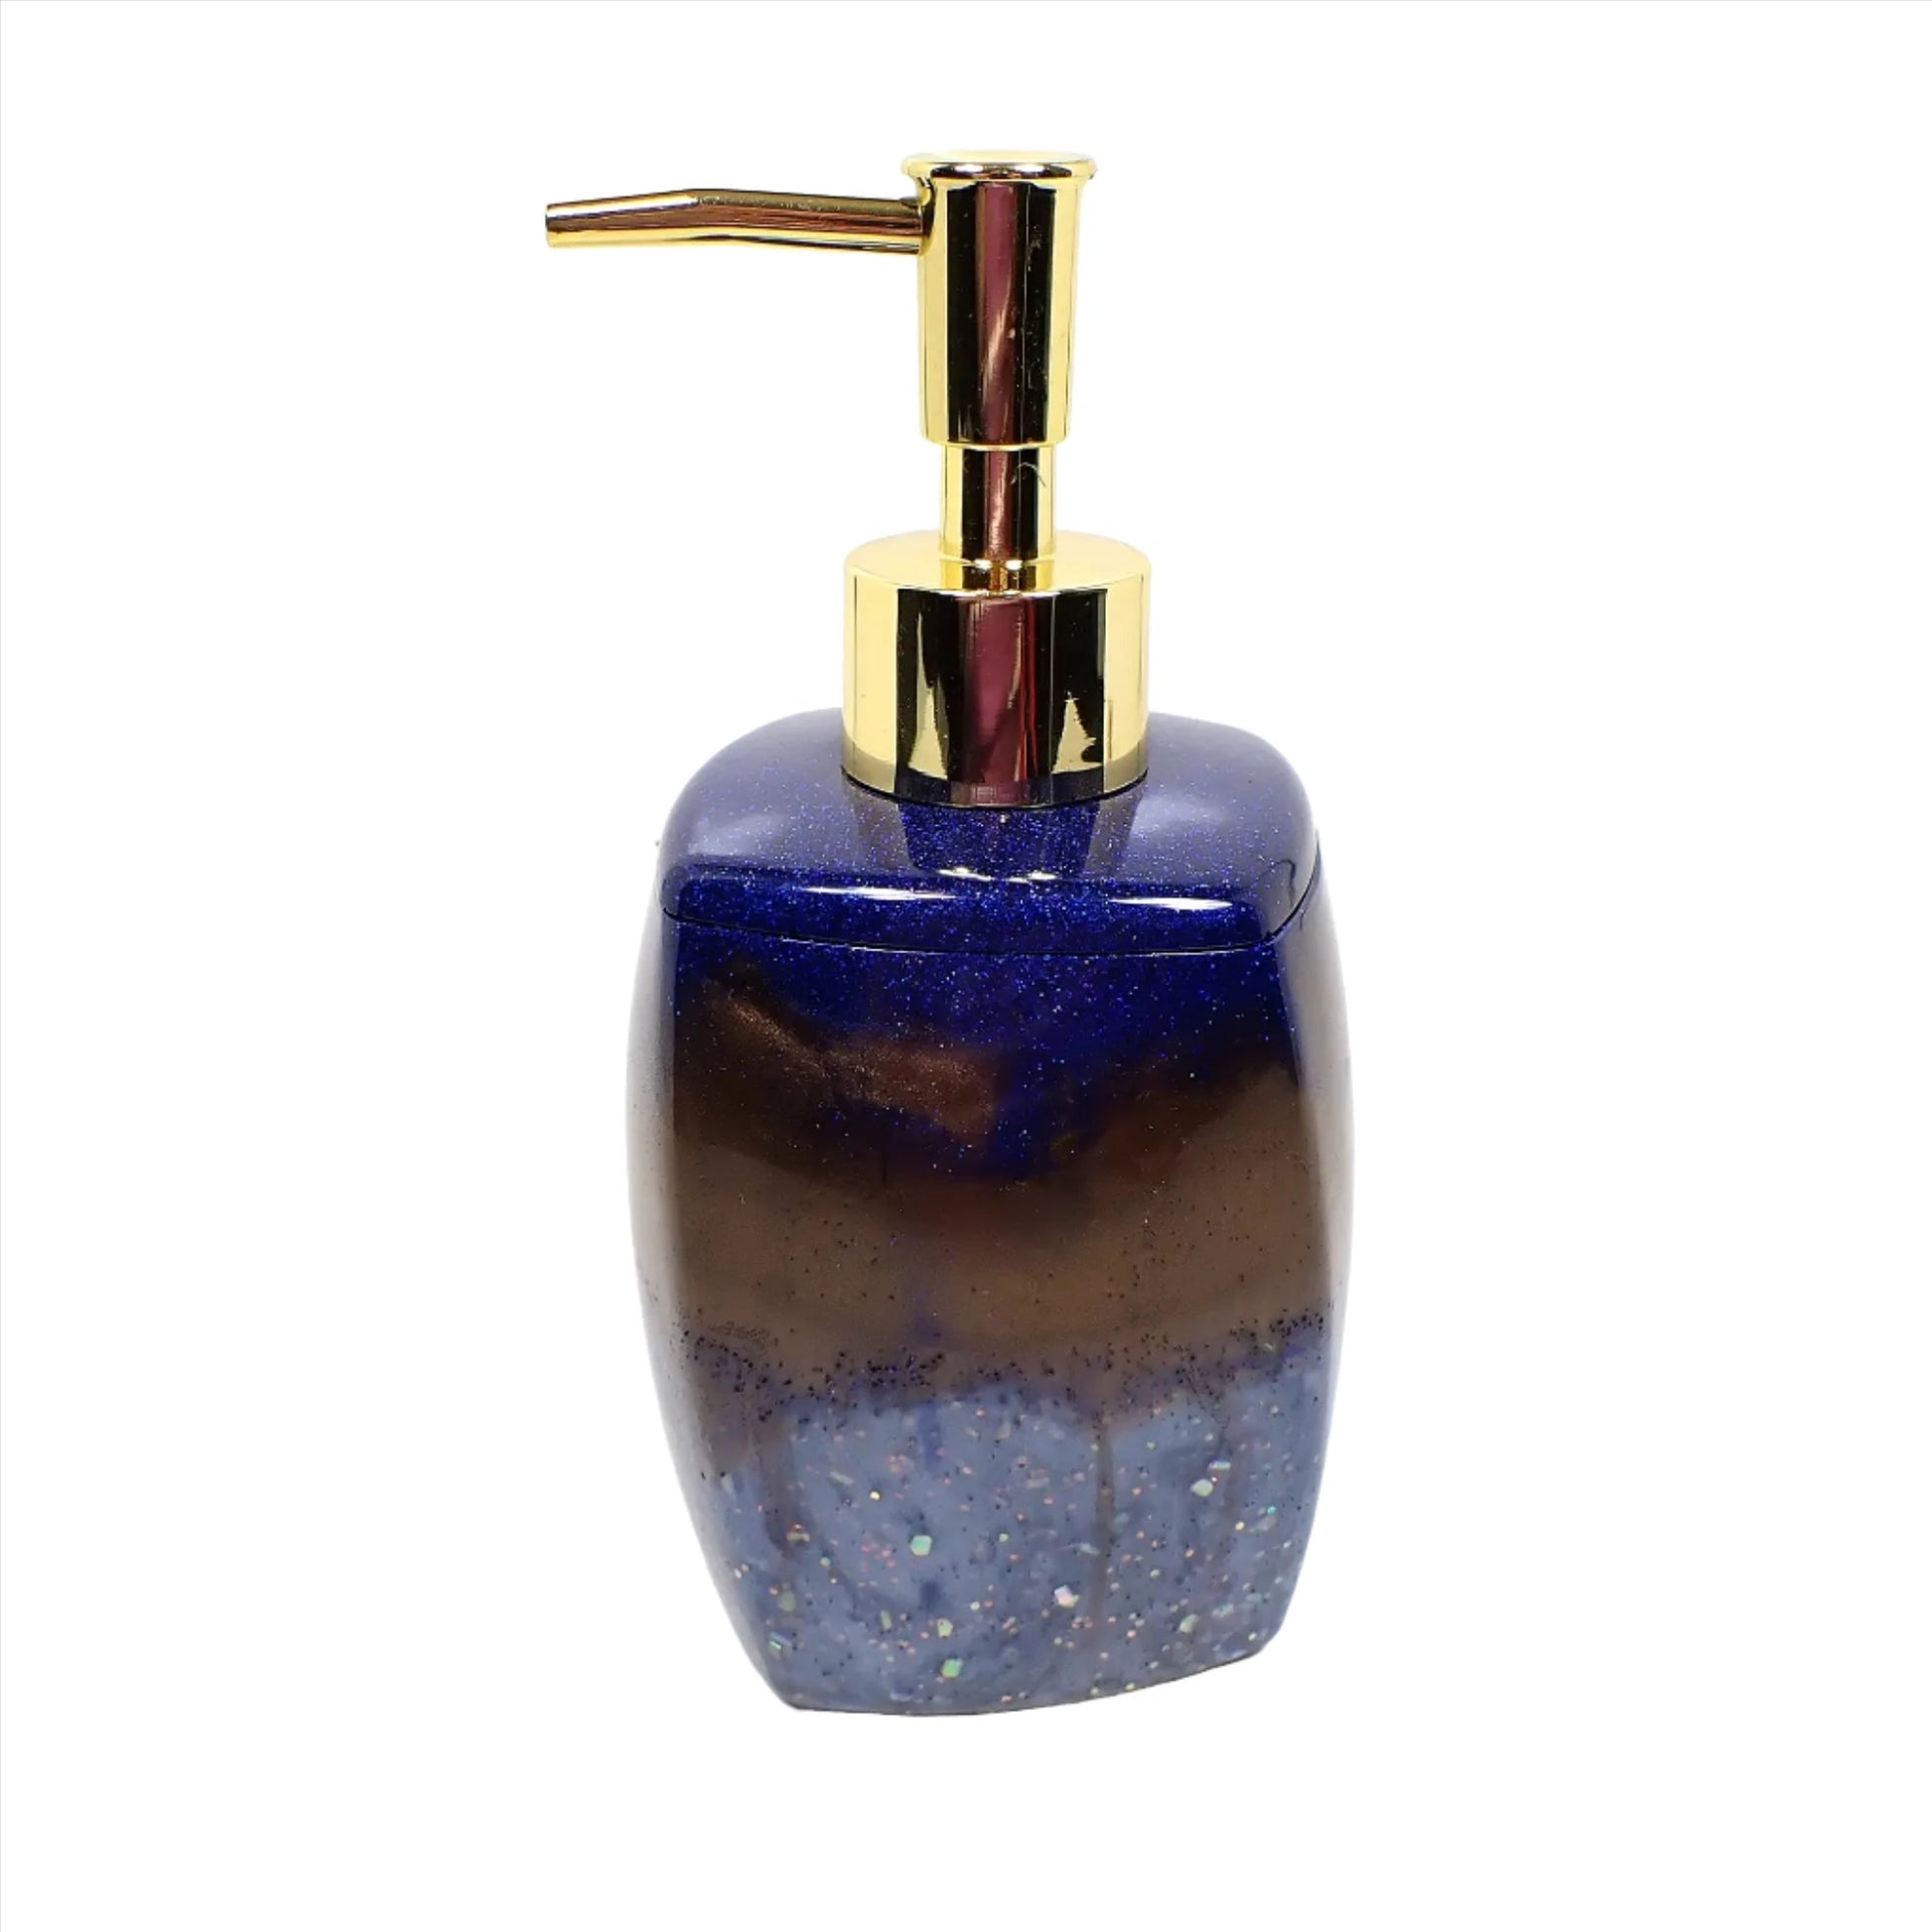 Side view of the handmade resin and glitter soap dispenser. It has a large rounded square design with a light twist to it. There is a gold tone metallic plastic pump style top. The top has pearly dark blue resin with tiny flecks of sparkling blue glitter, the middle area has swirls of pearly dark brown resin, and the bottom has pearly light blue resin with chunky iridescent glitter.